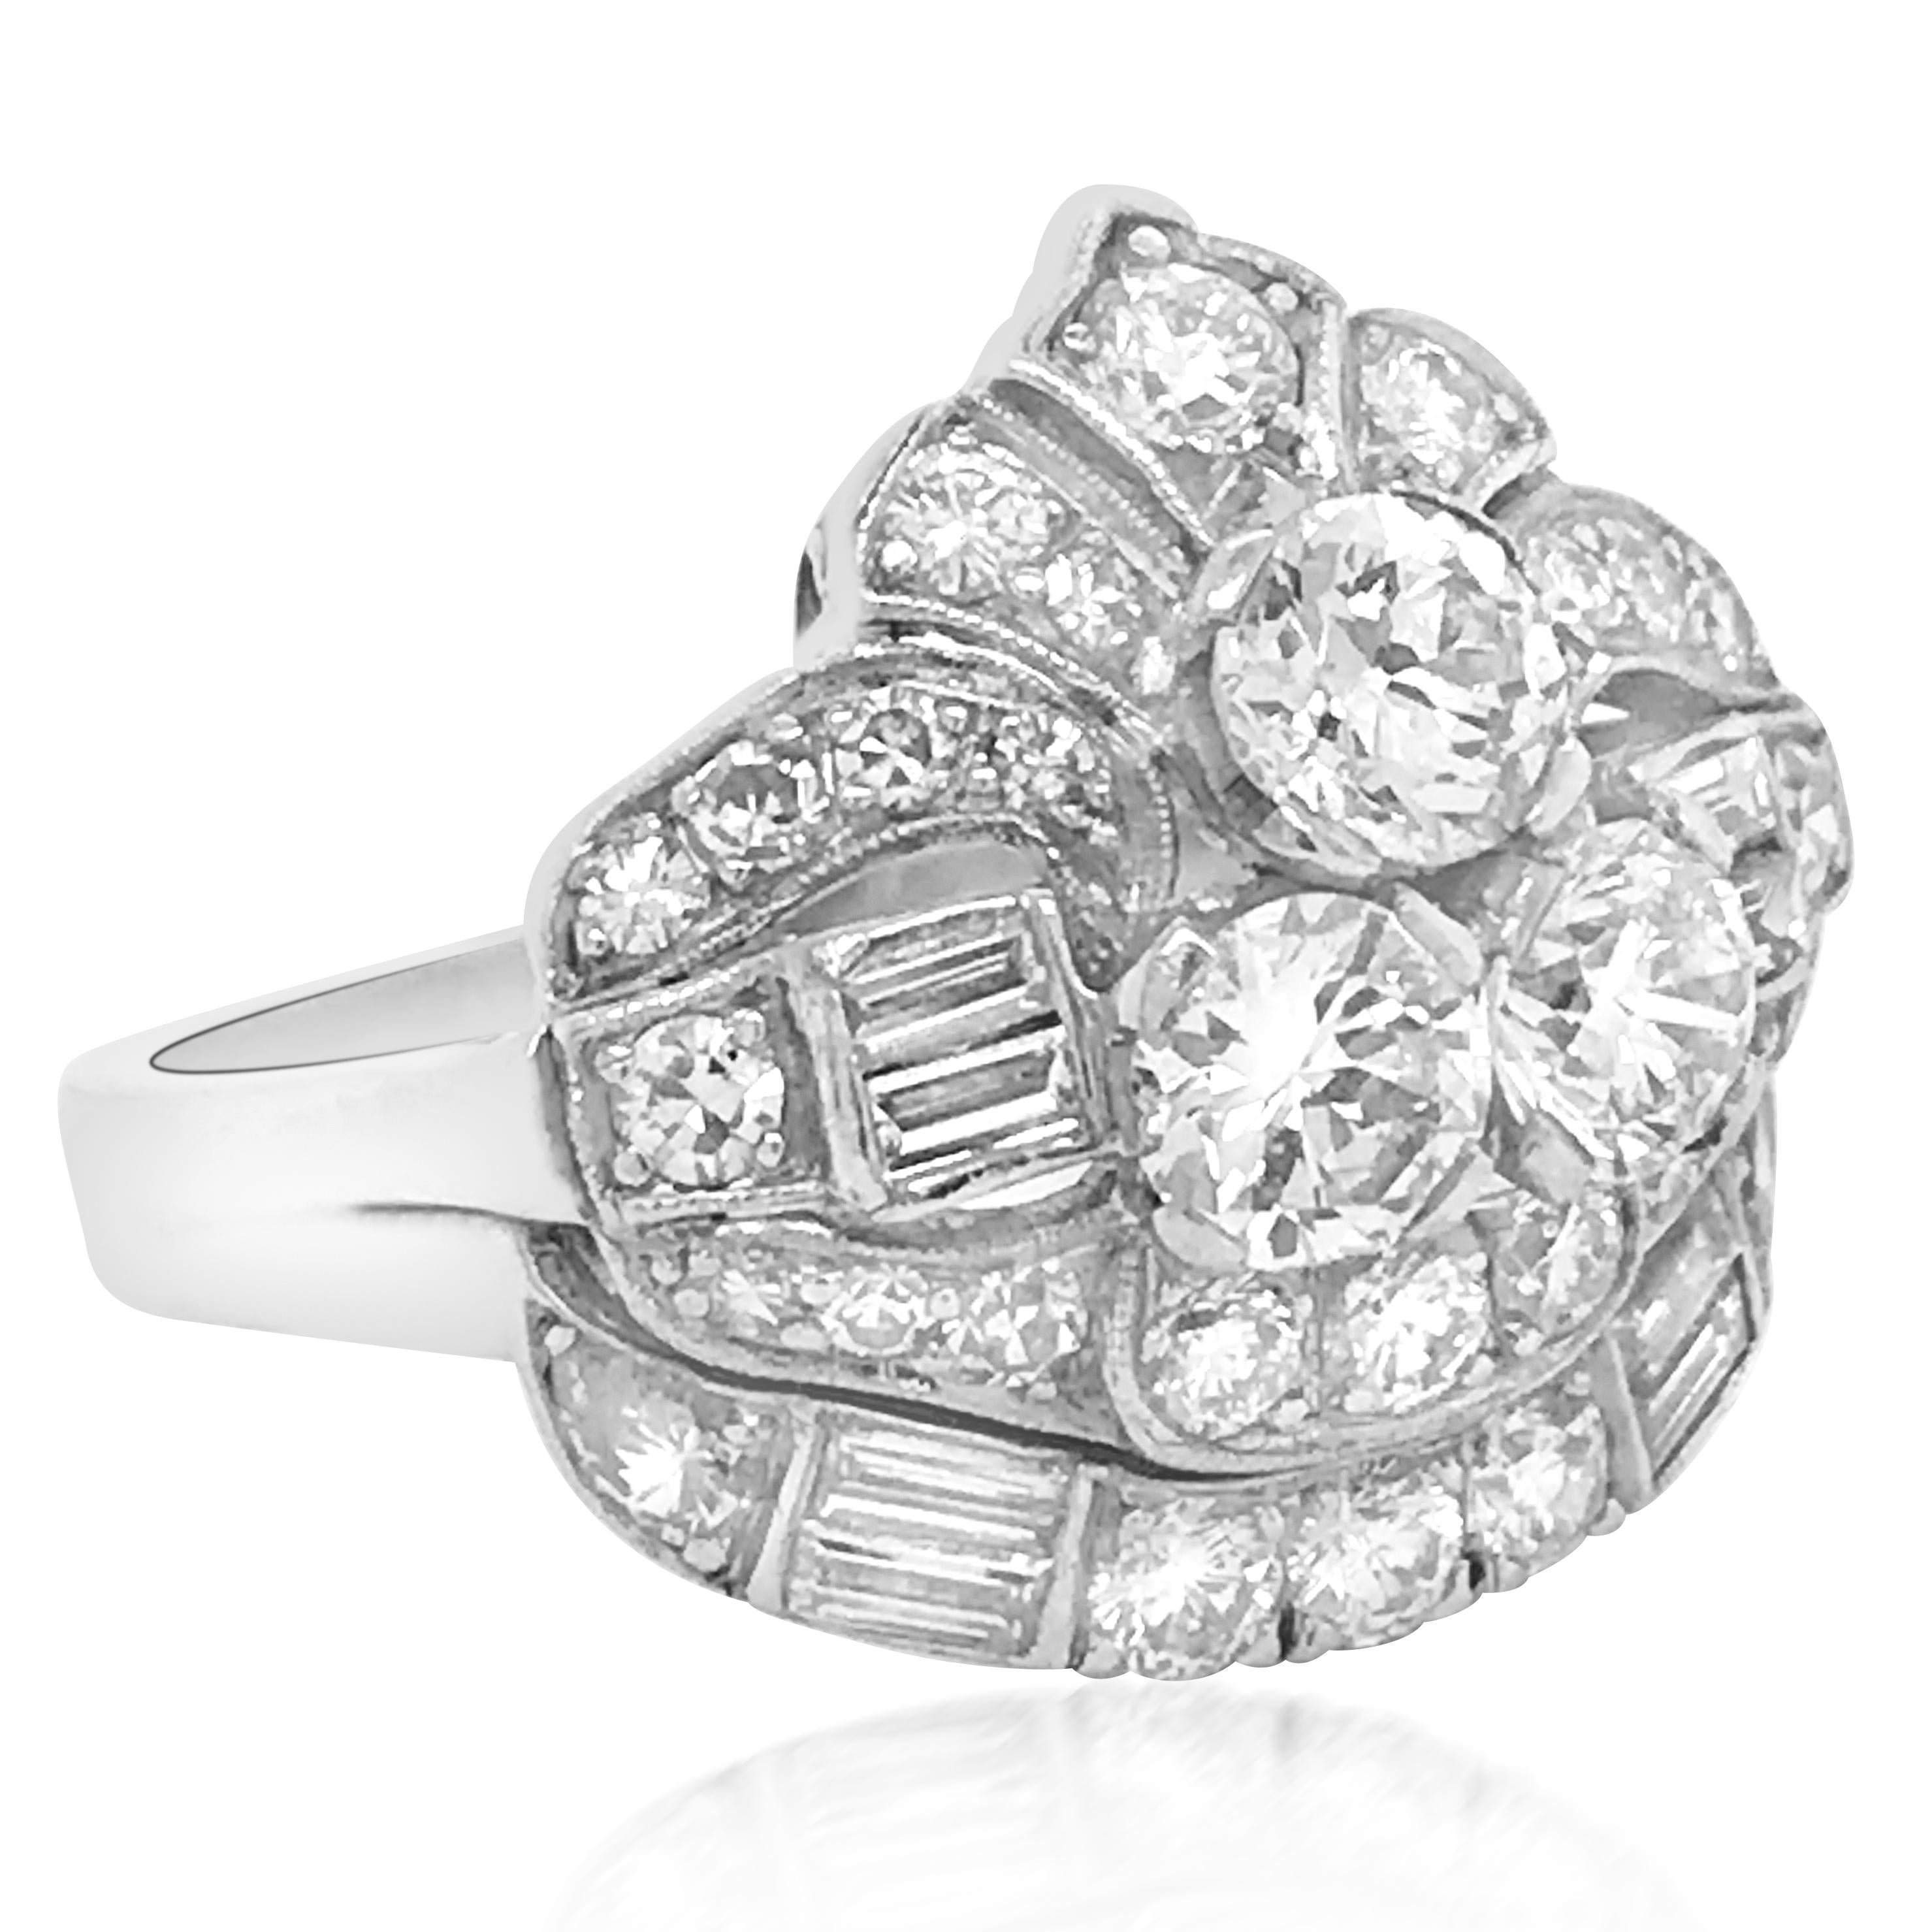 This stunning and classic Art Deco diamond ring is crafted in solid platinum, weighing 11 grams and in ring size 8.5. Centered with three old-European cut diamonds weighing approx. 0.35ct each, this alluring ring is further adorned with old-European